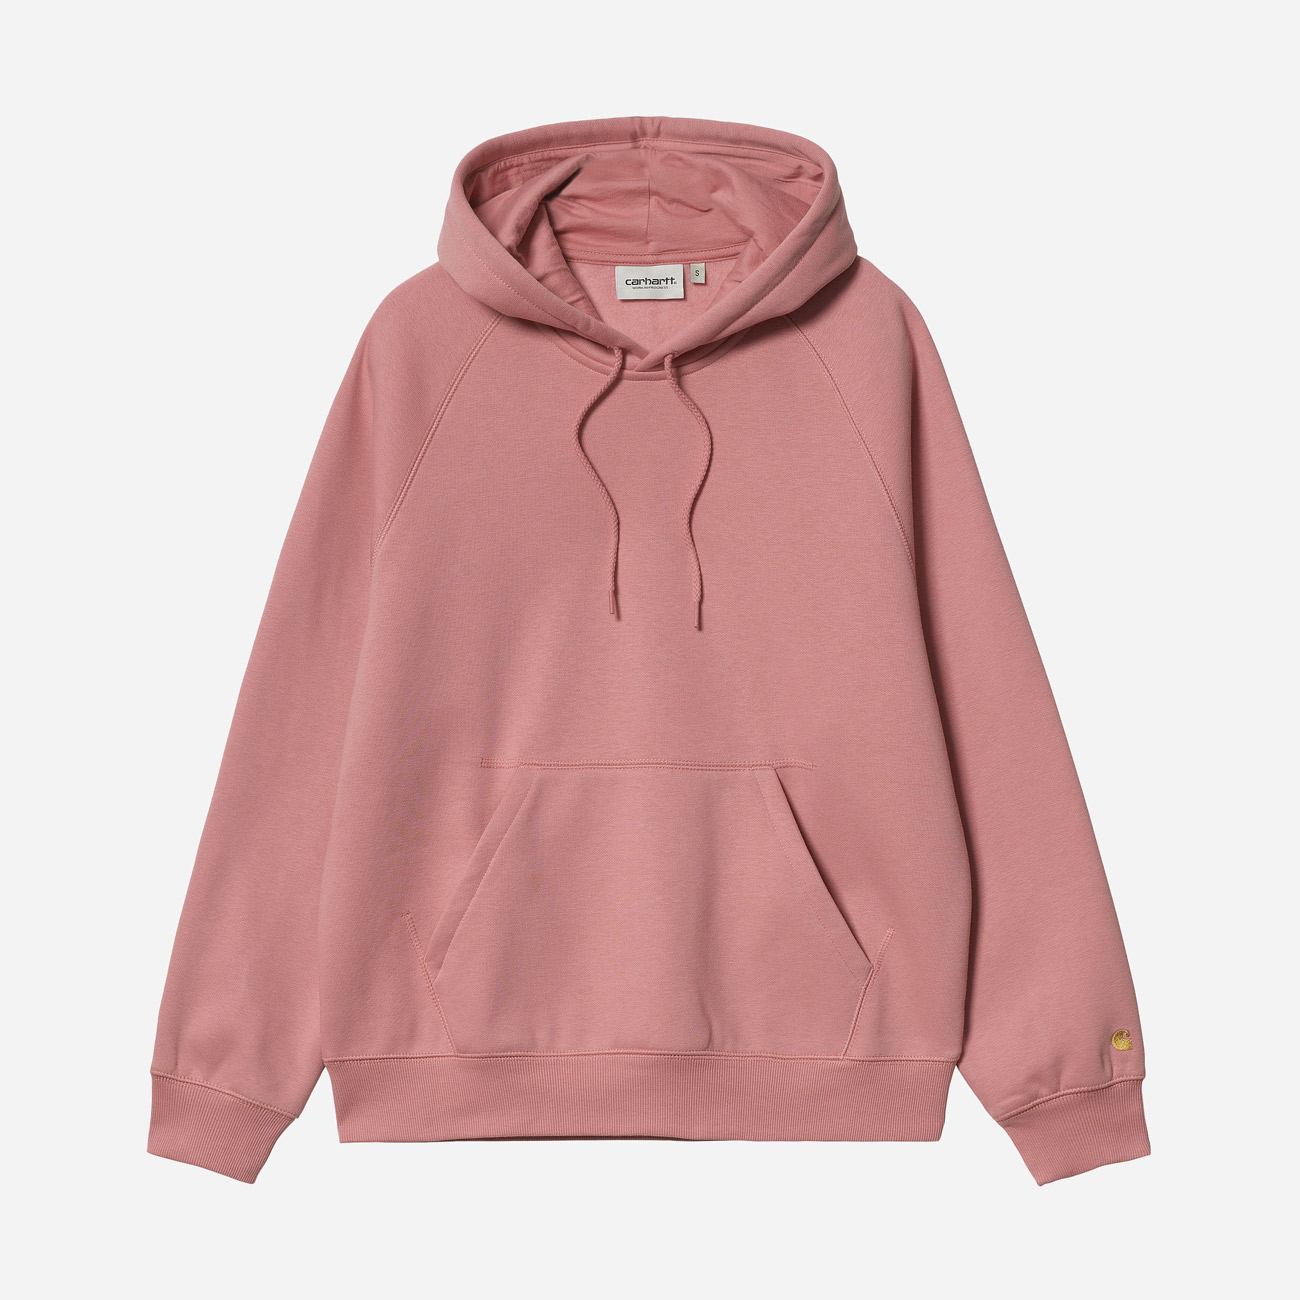 Carhartt Women's Hooded Chase Sweat - Rothko Pink/Gold